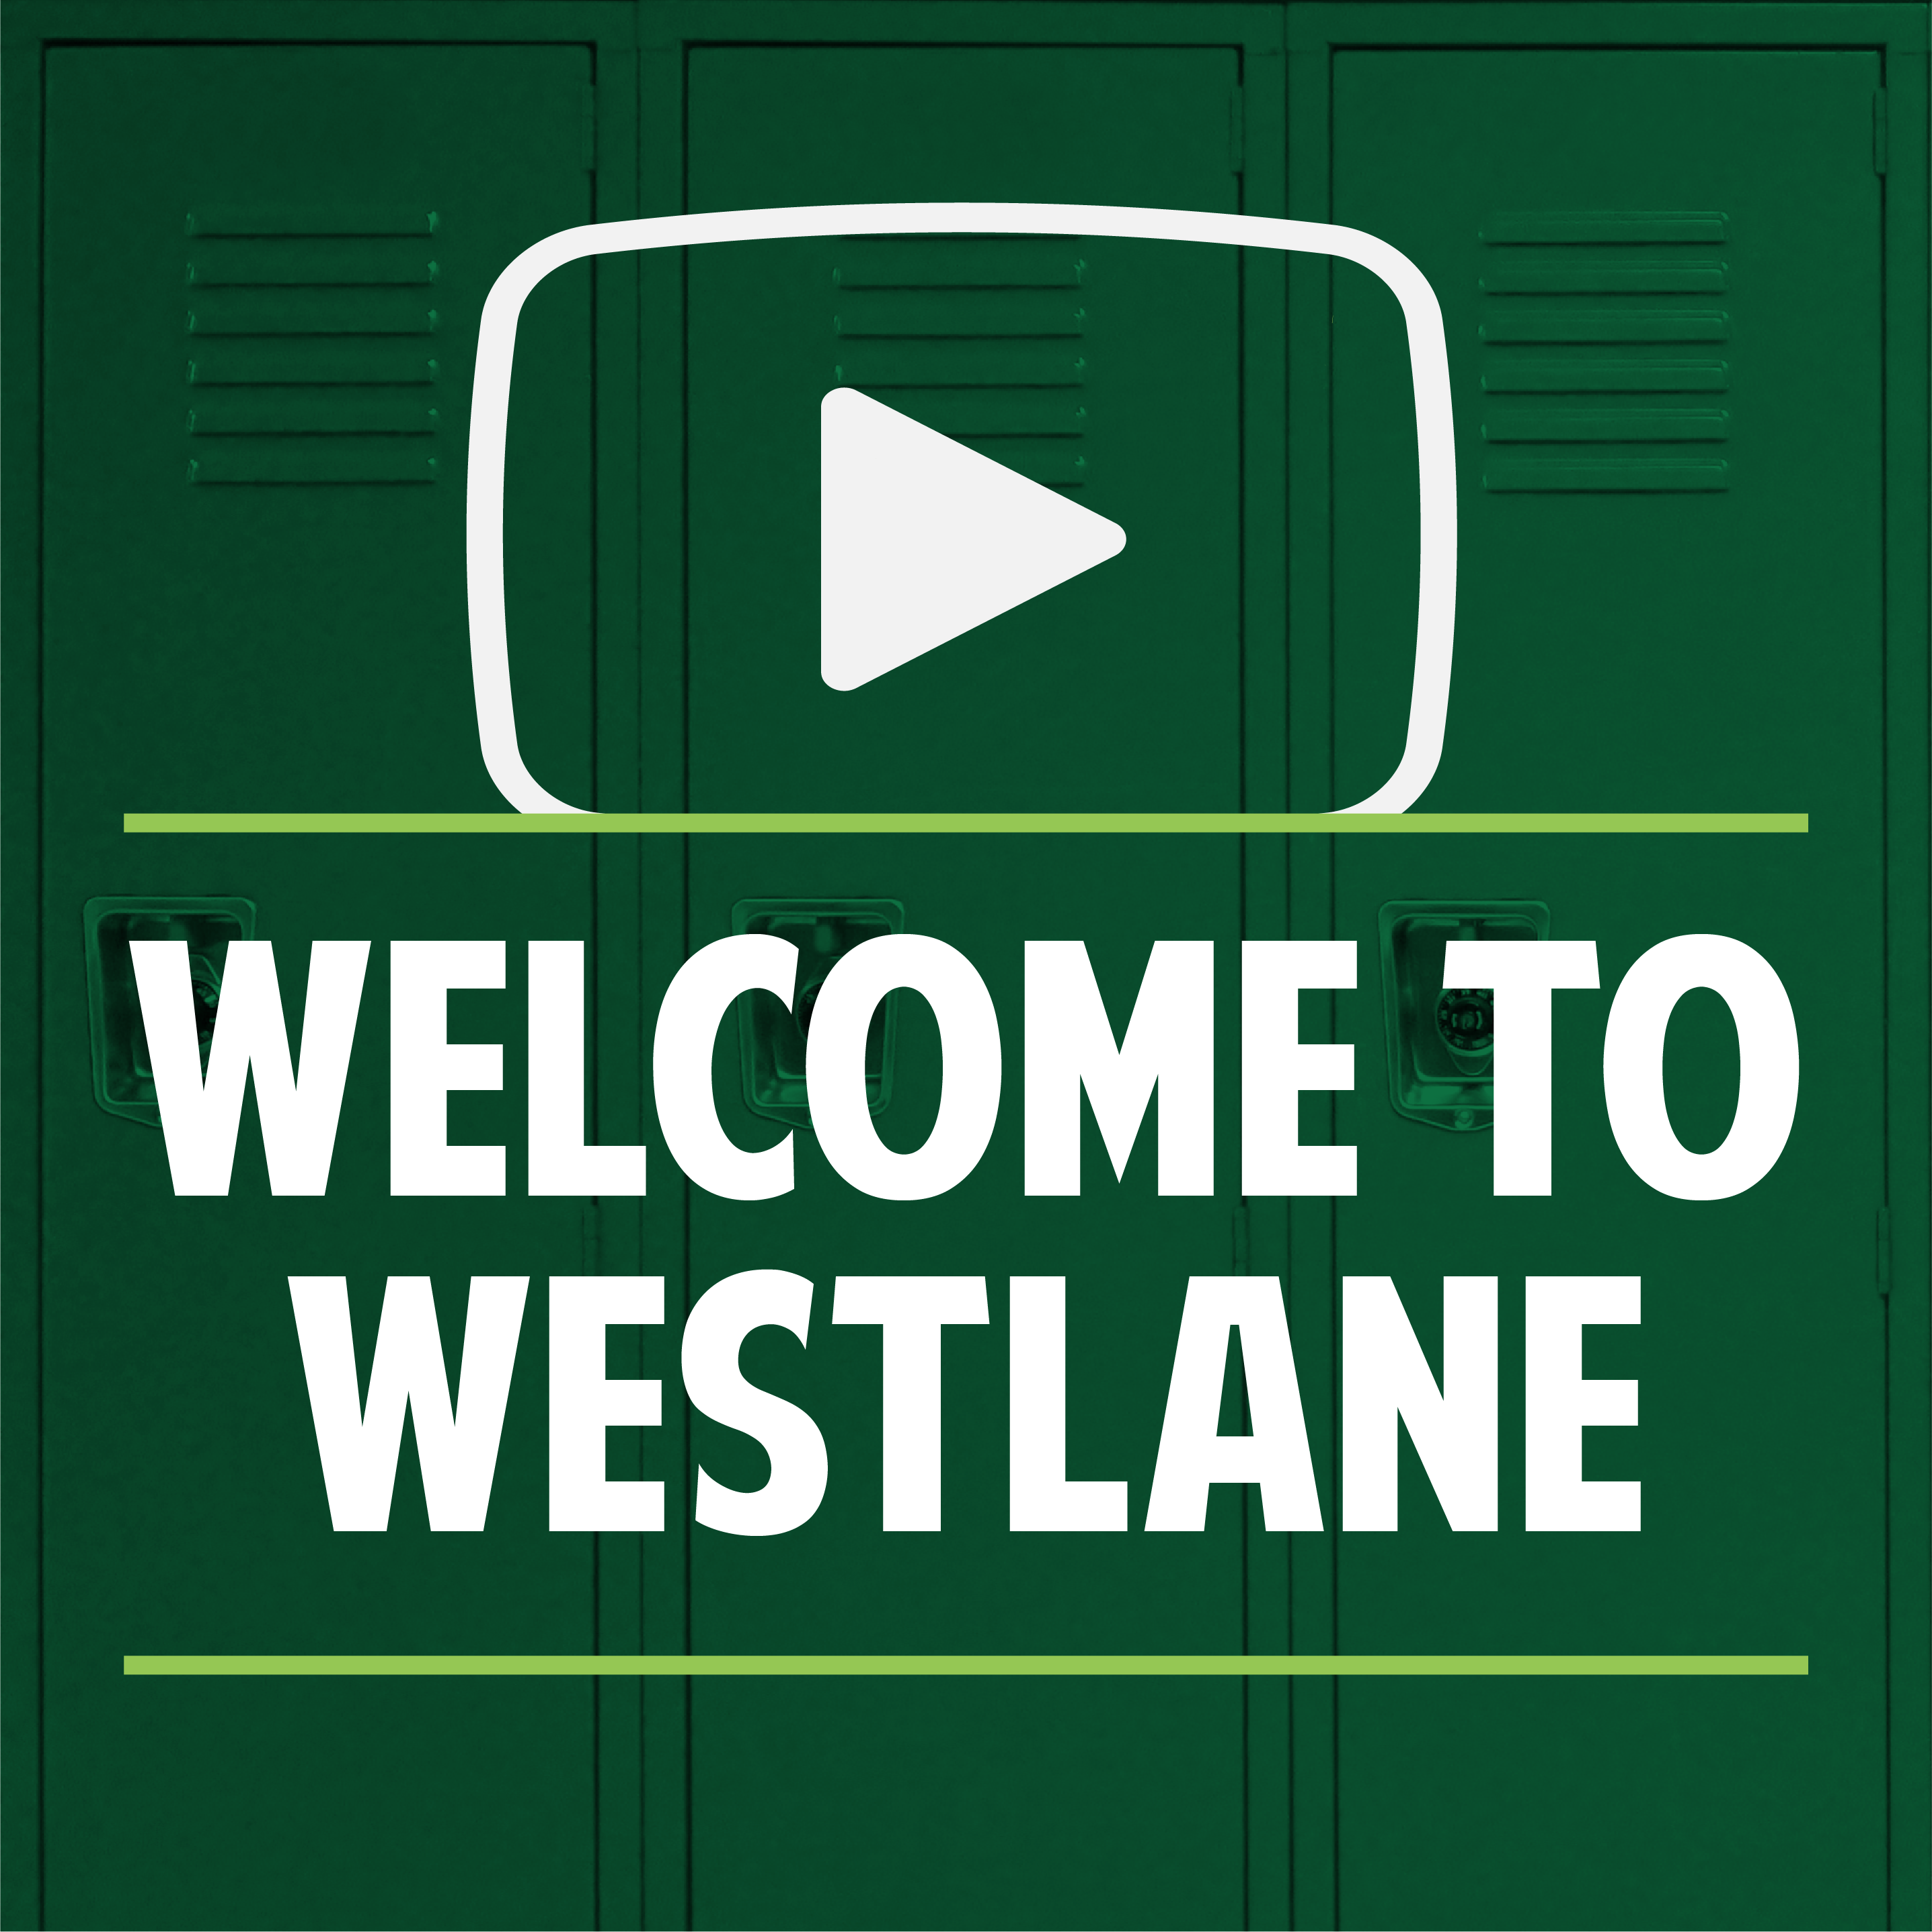 Welcome to Westlane@2x